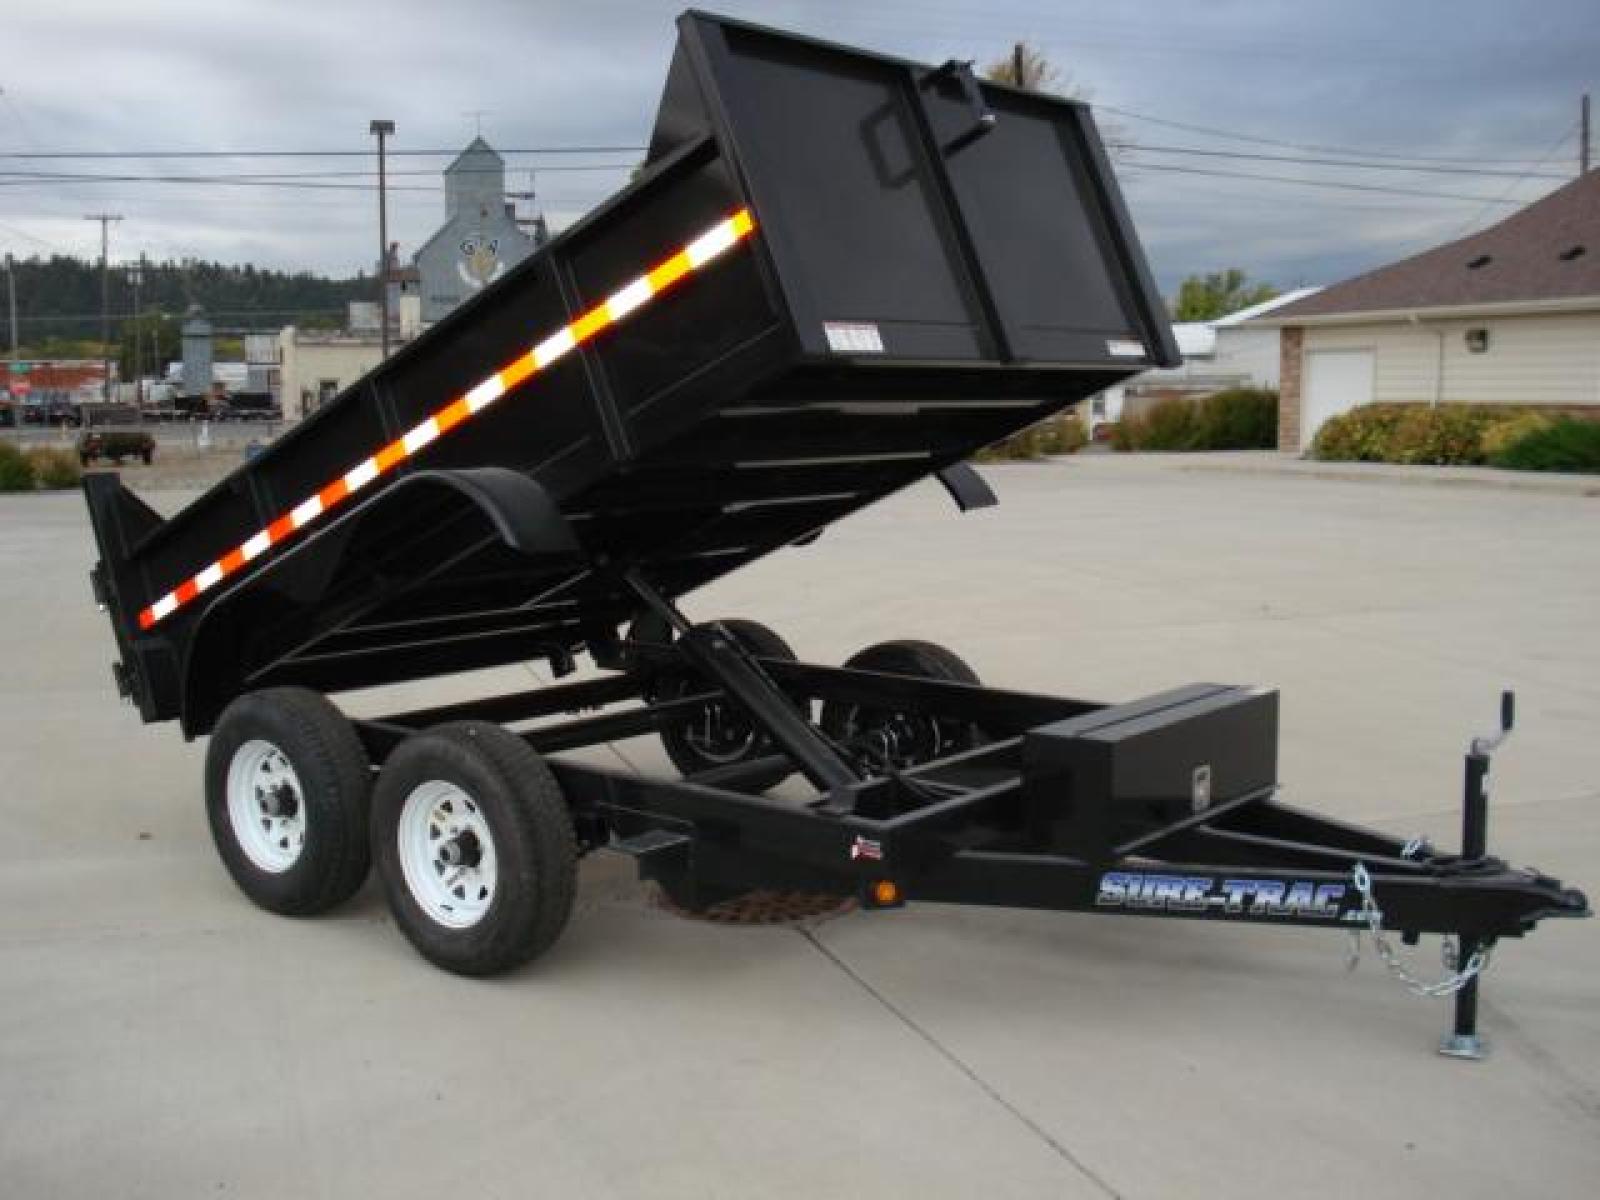 2022 Black SureTrac 6 x10 Lo Pro Dump Trailer , located at 310 West 1st Ave, Big Timber, MT, 59011, (406) 860-8510, 45.833511, -109.957809 - SURE-TRAC 6 X 10 LO PRO DUMP TRAILER, 10K GVW, SINGLE RAM HOIST, EZ LUBE HUBS, DUAL REAR GATE, BRAKES BOTH AXLES, EZ LUBE HUBS, (5) D-RING TIE-DOWNS, LED LIGHTS, POWDER COAT FINISH, REAR RAMPS, MESH TARP, DEEP CYCLE BATTERY. OPTIONS: SPARE TIRE $165.00. THE BEST TRAILERS AT THE BEST PRICE!!! - Photo #1